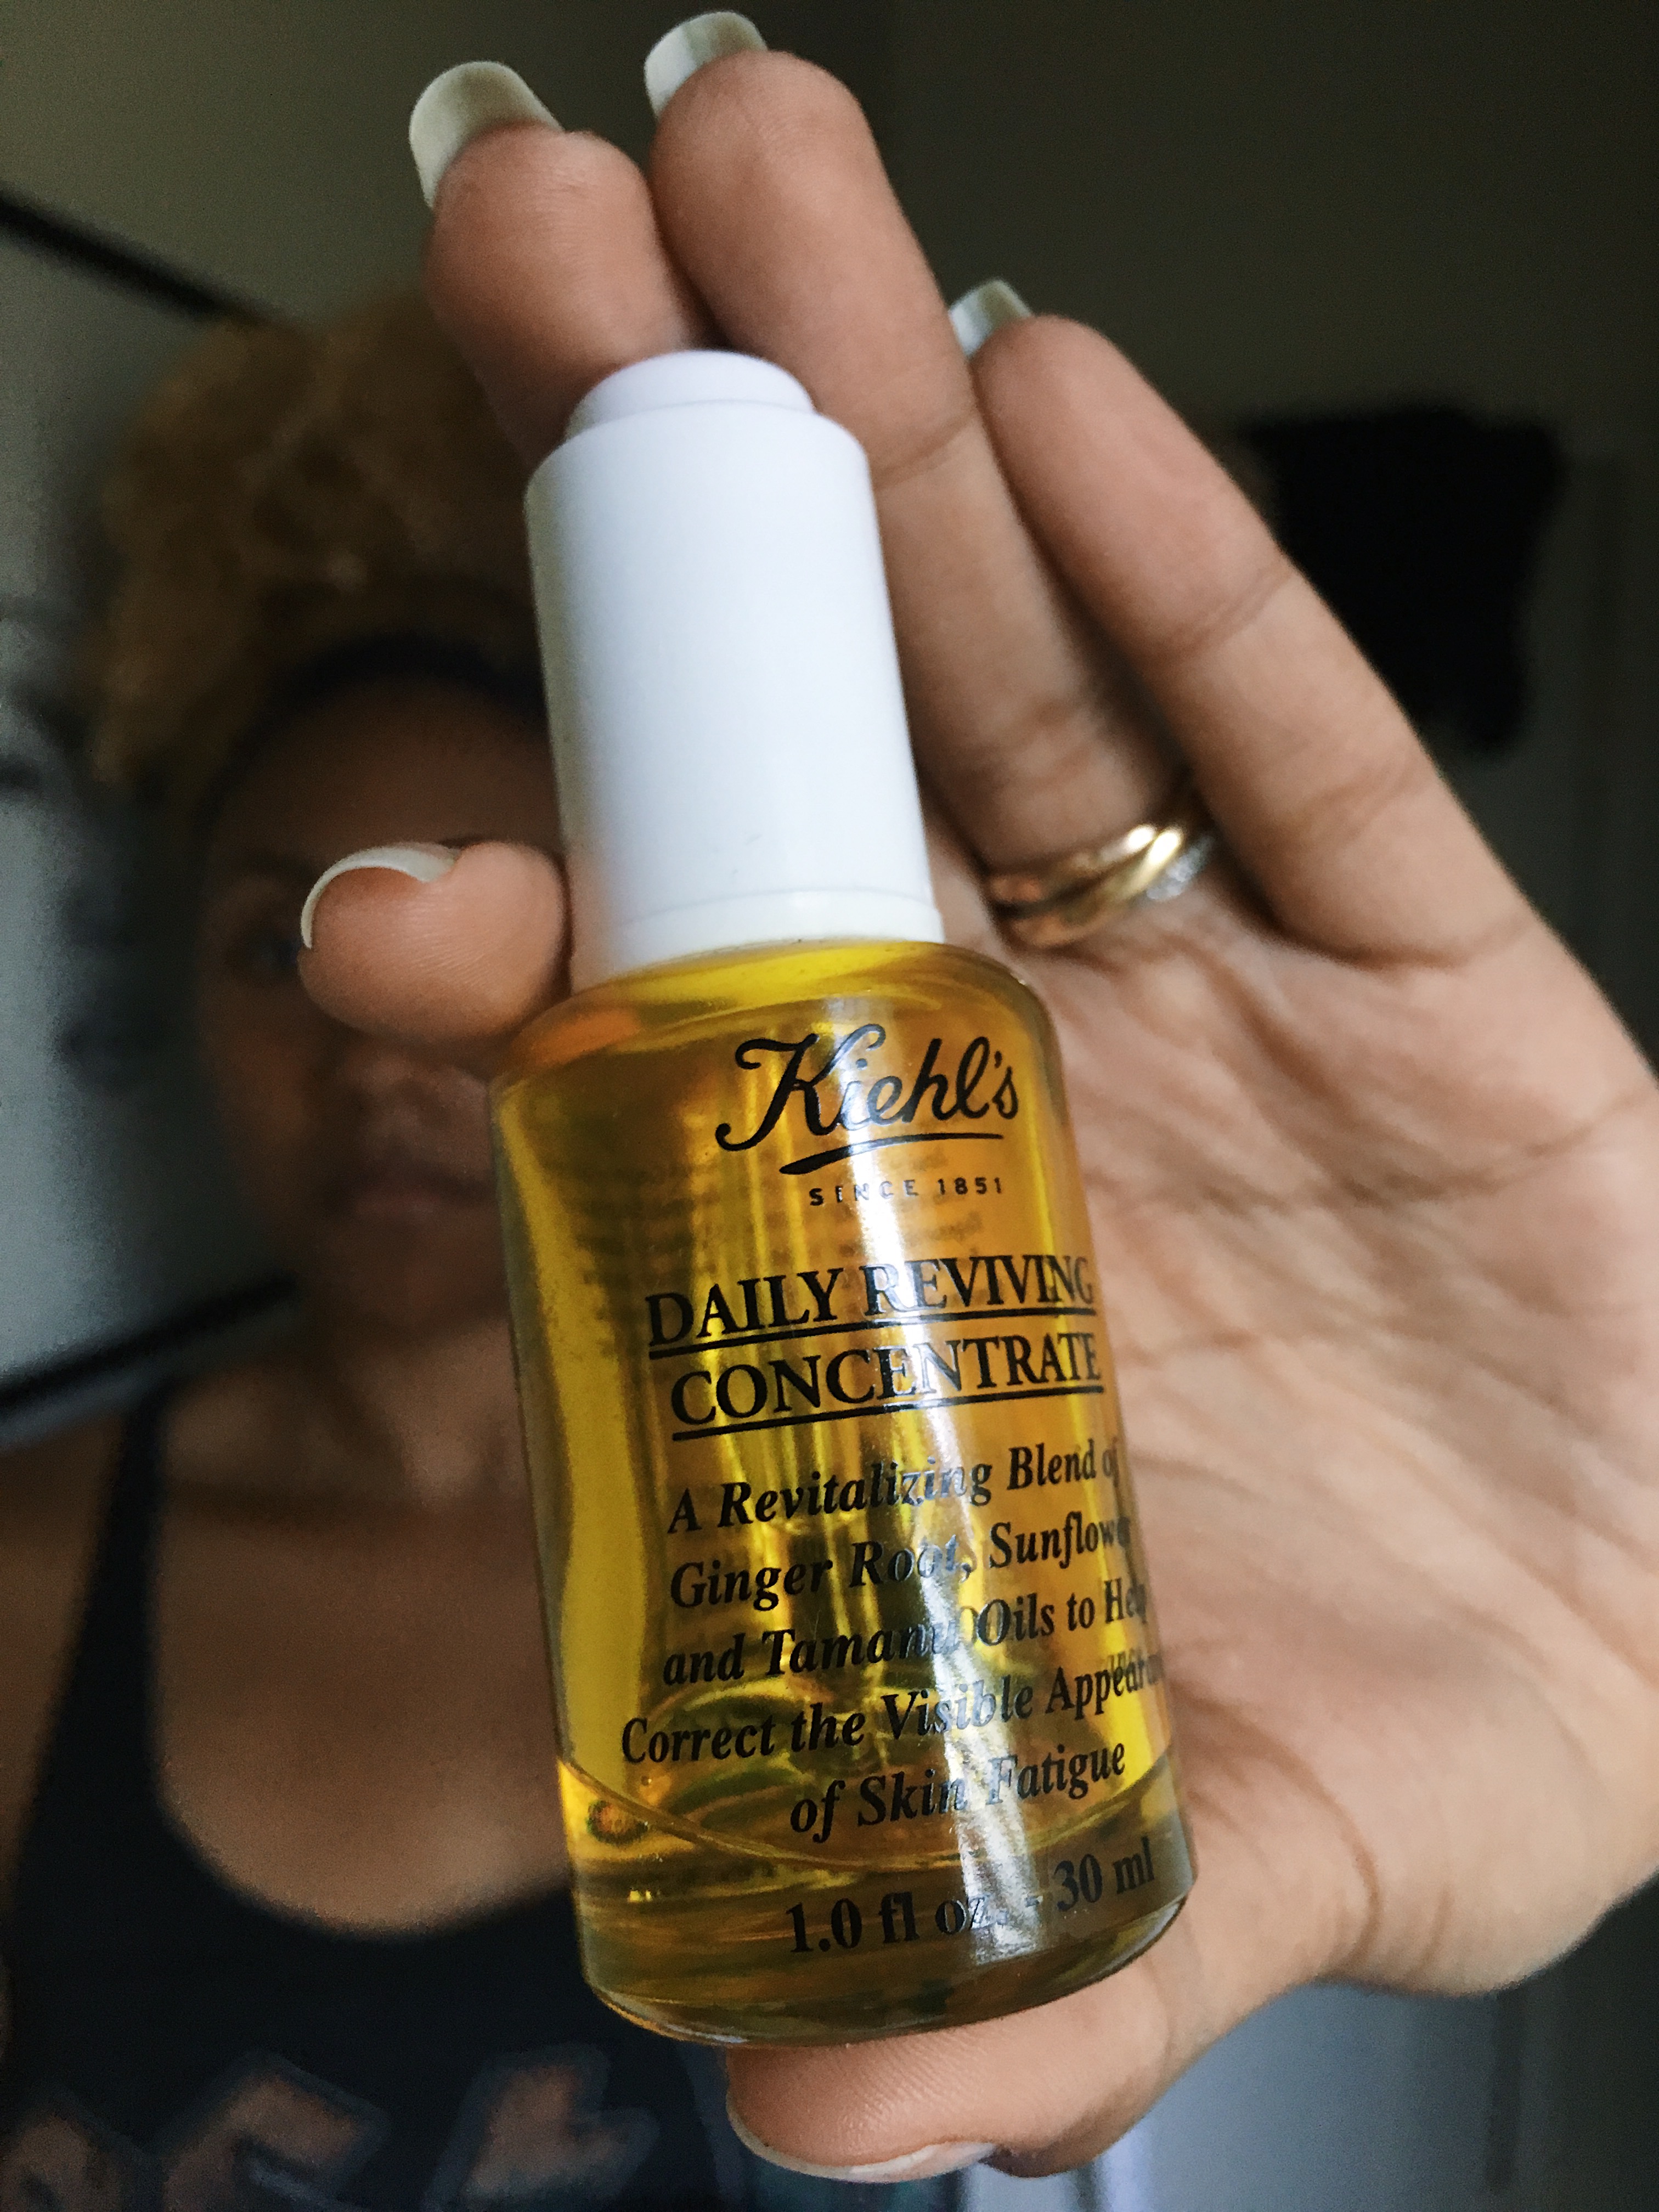 Daily Reviving Concentrate-kiehls oil-skincare routine